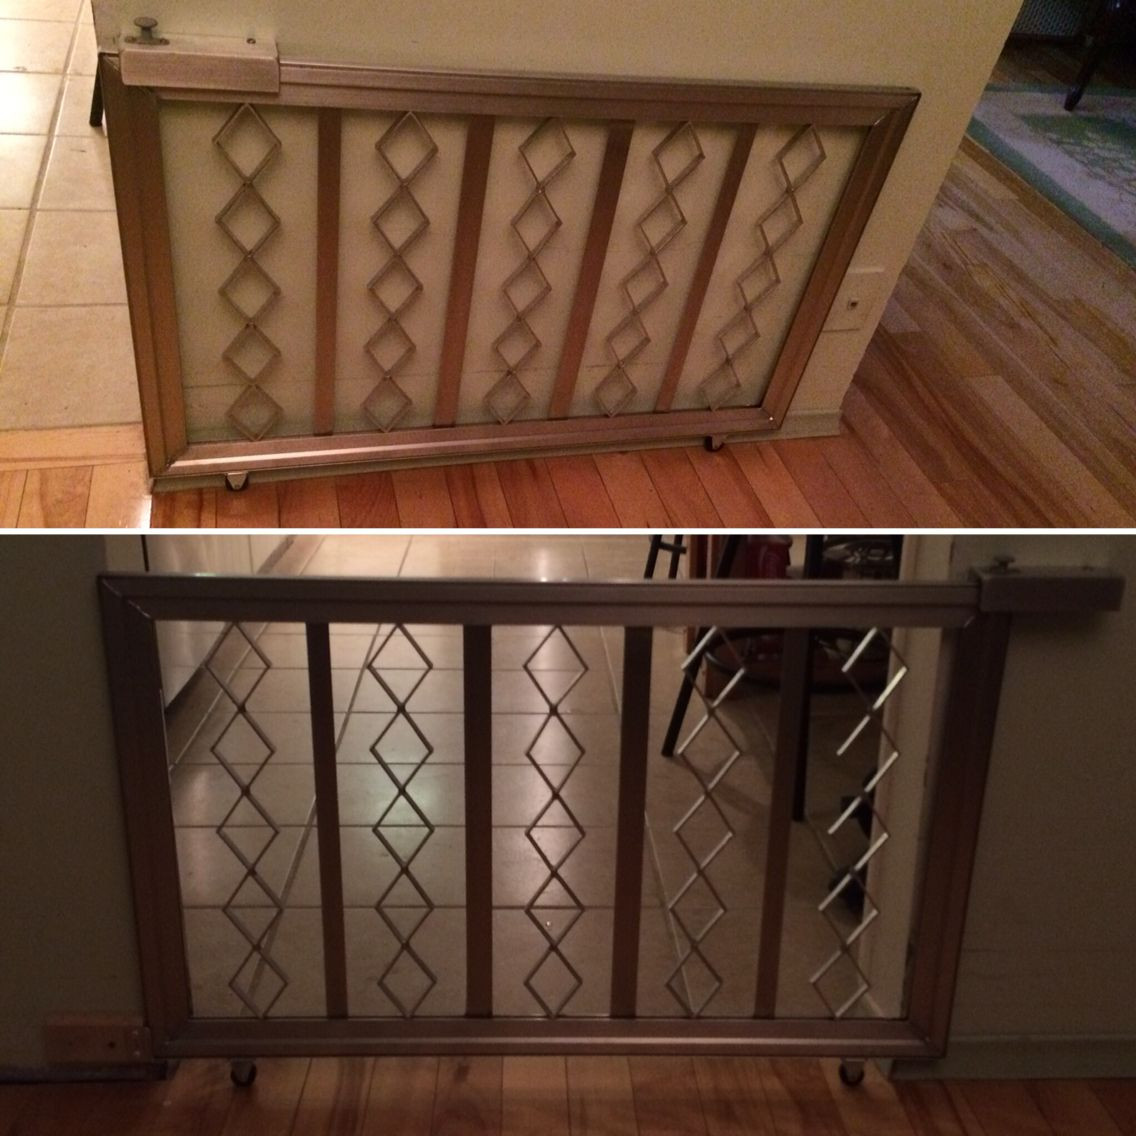 Sliding Baby Gate DIY
 Need something to keep the dogs out of the kitchen while I